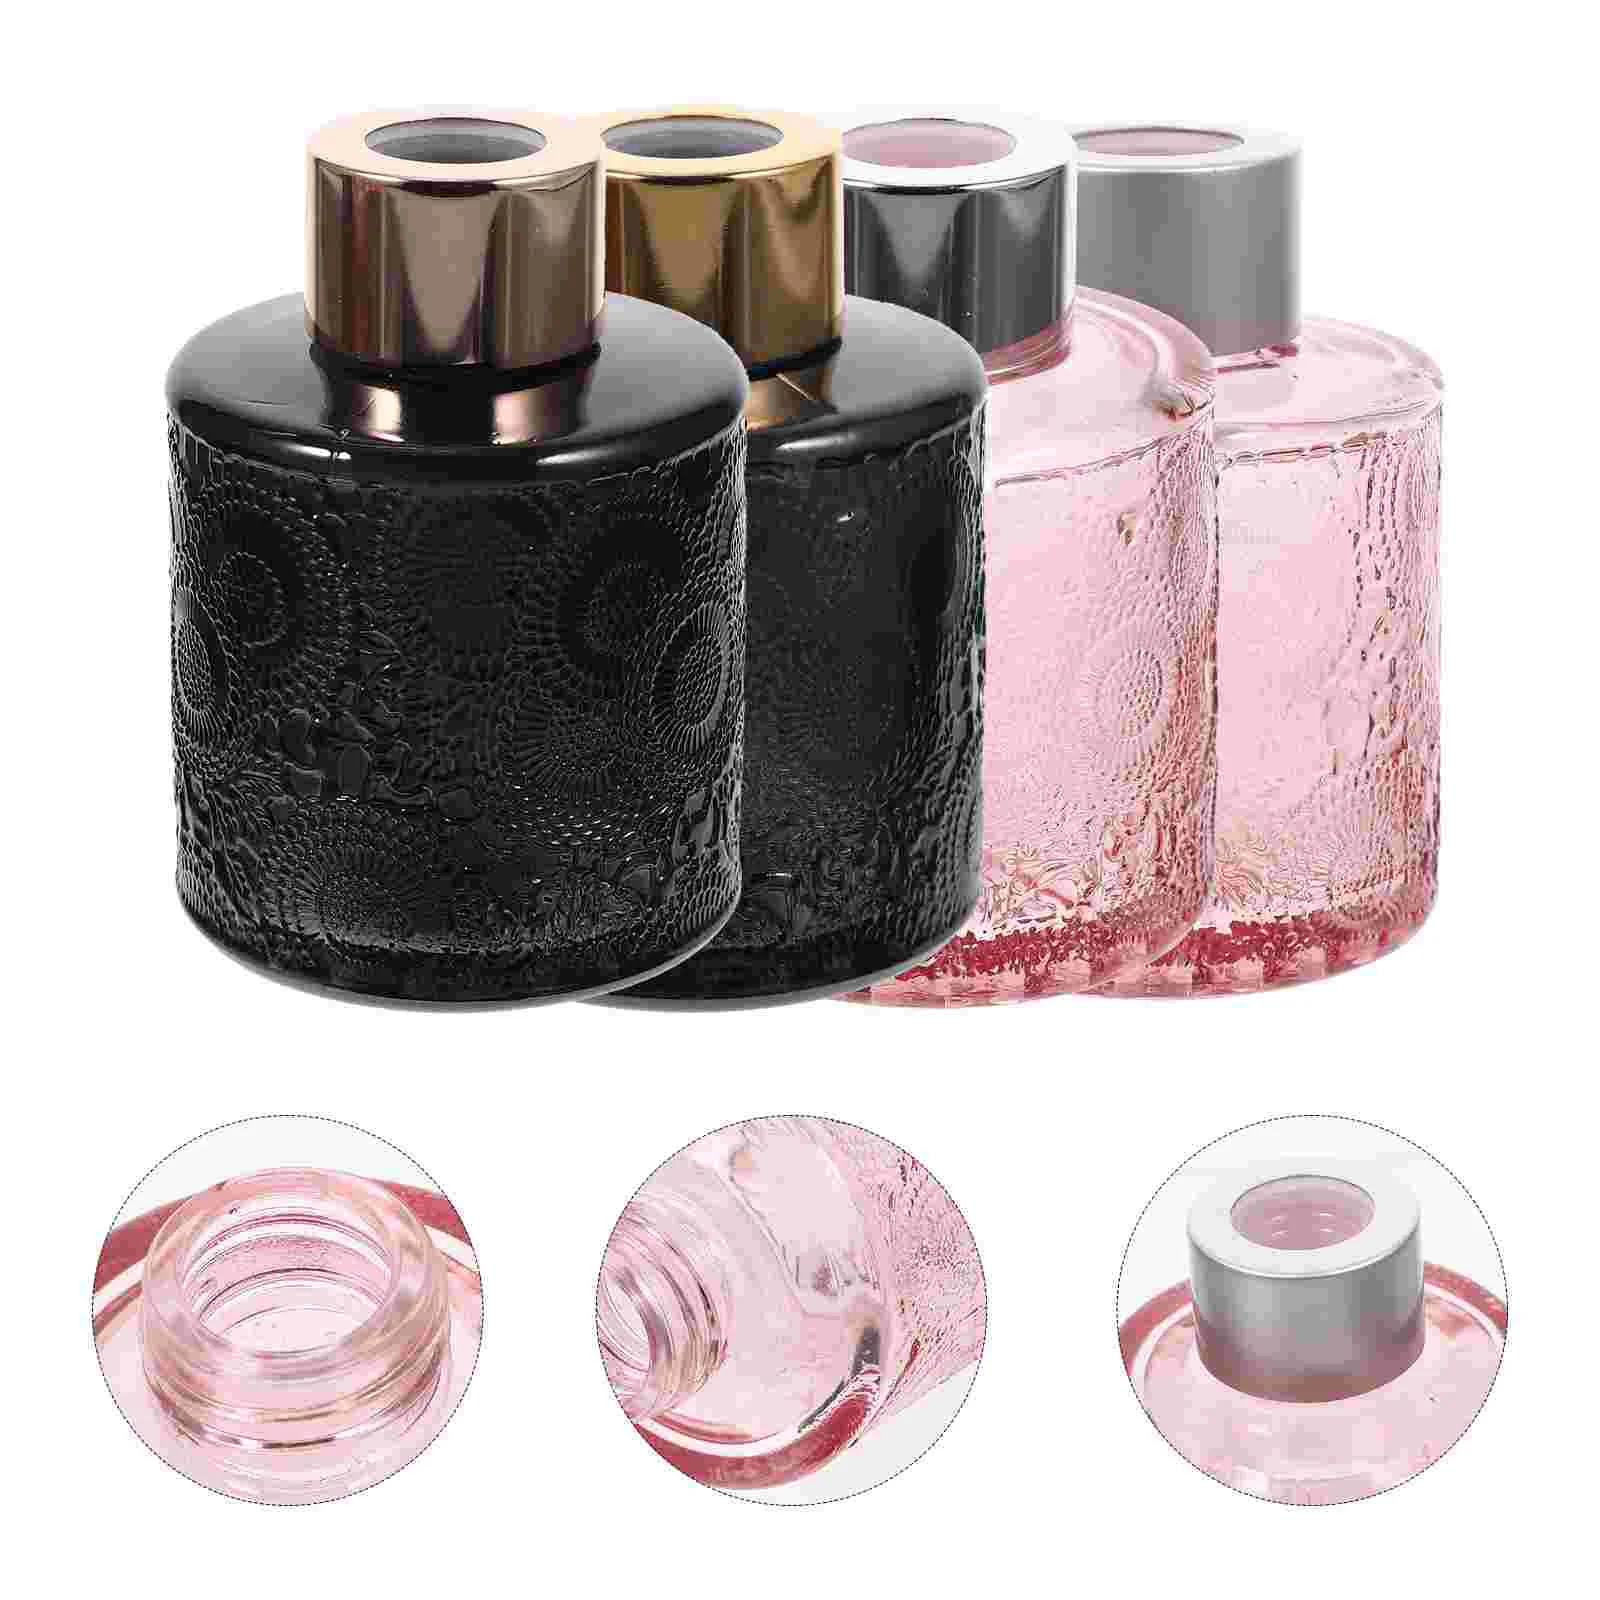 

4 Pcs Diffuser Home Embossed Aroma Bottles Fragrance Scent Diffusers Essential Oils Reed Empty Aromatherapy Children